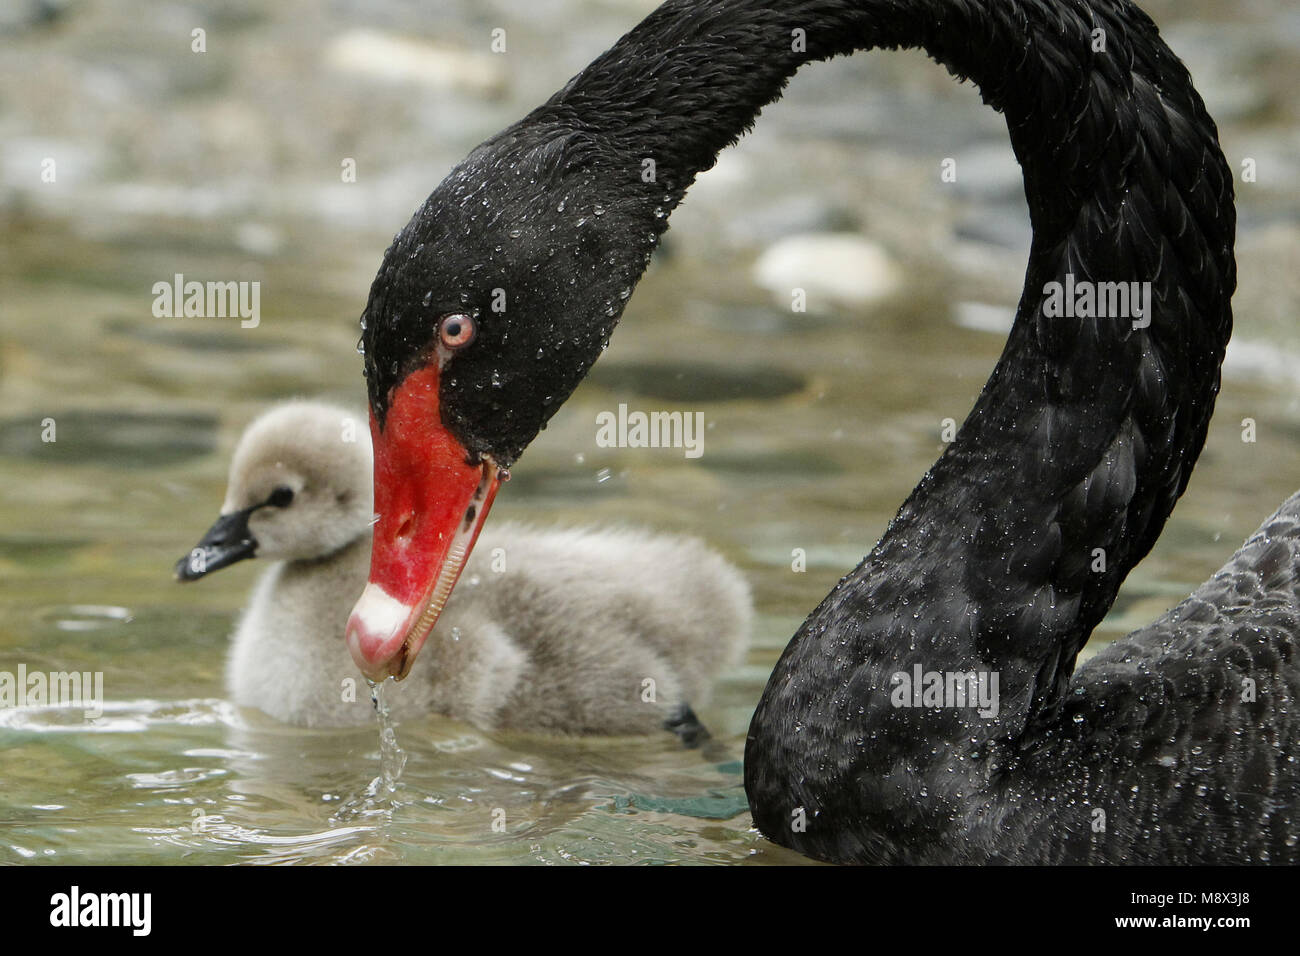 Medellin, Colombia, on 20 March 2018. A black swan takes care of it's Stock  Photo - Alamy